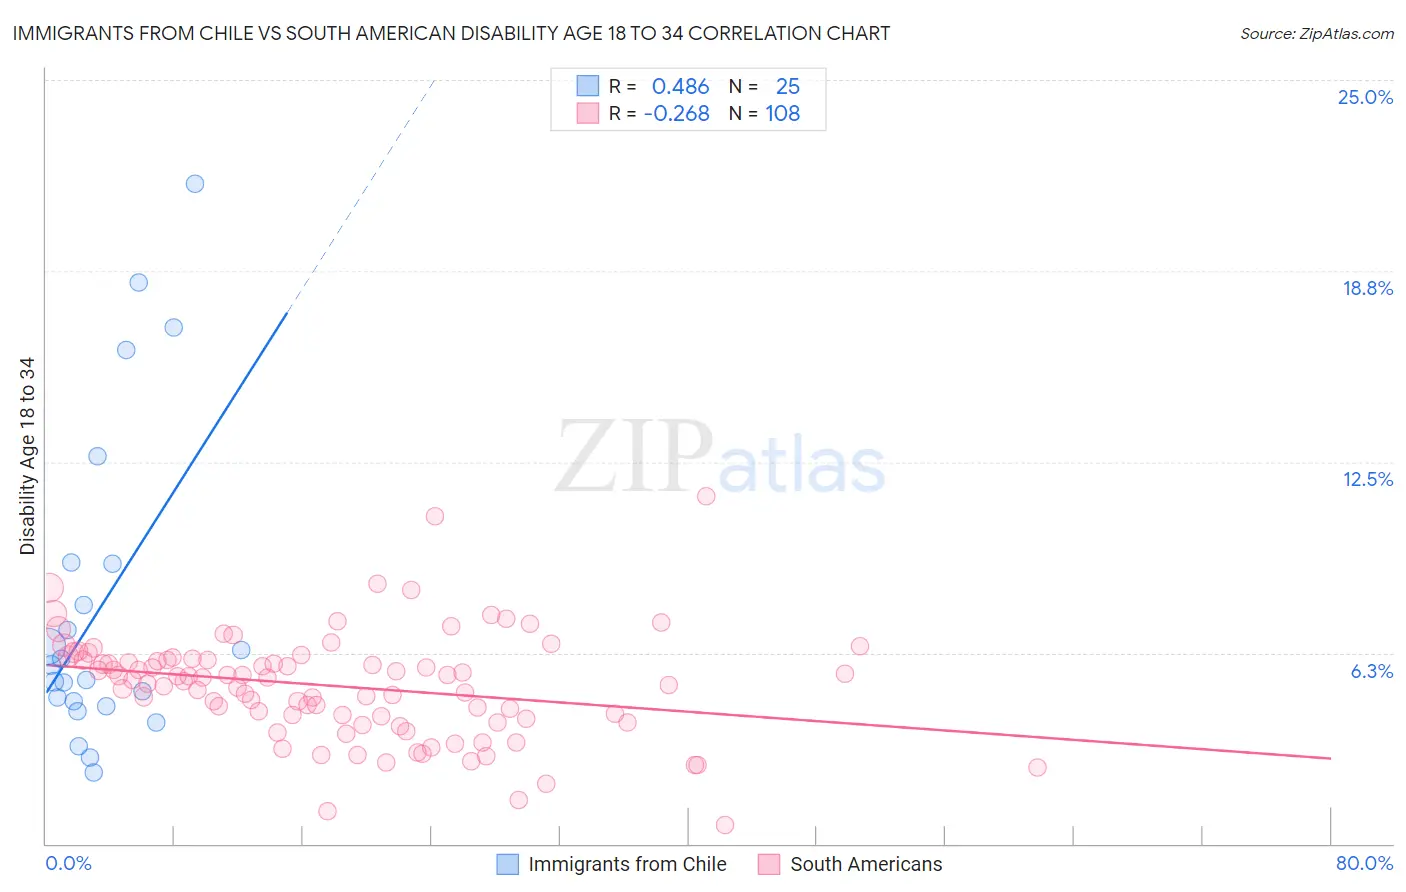 Immigrants from Chile vs South American Disability Age 18 to 34